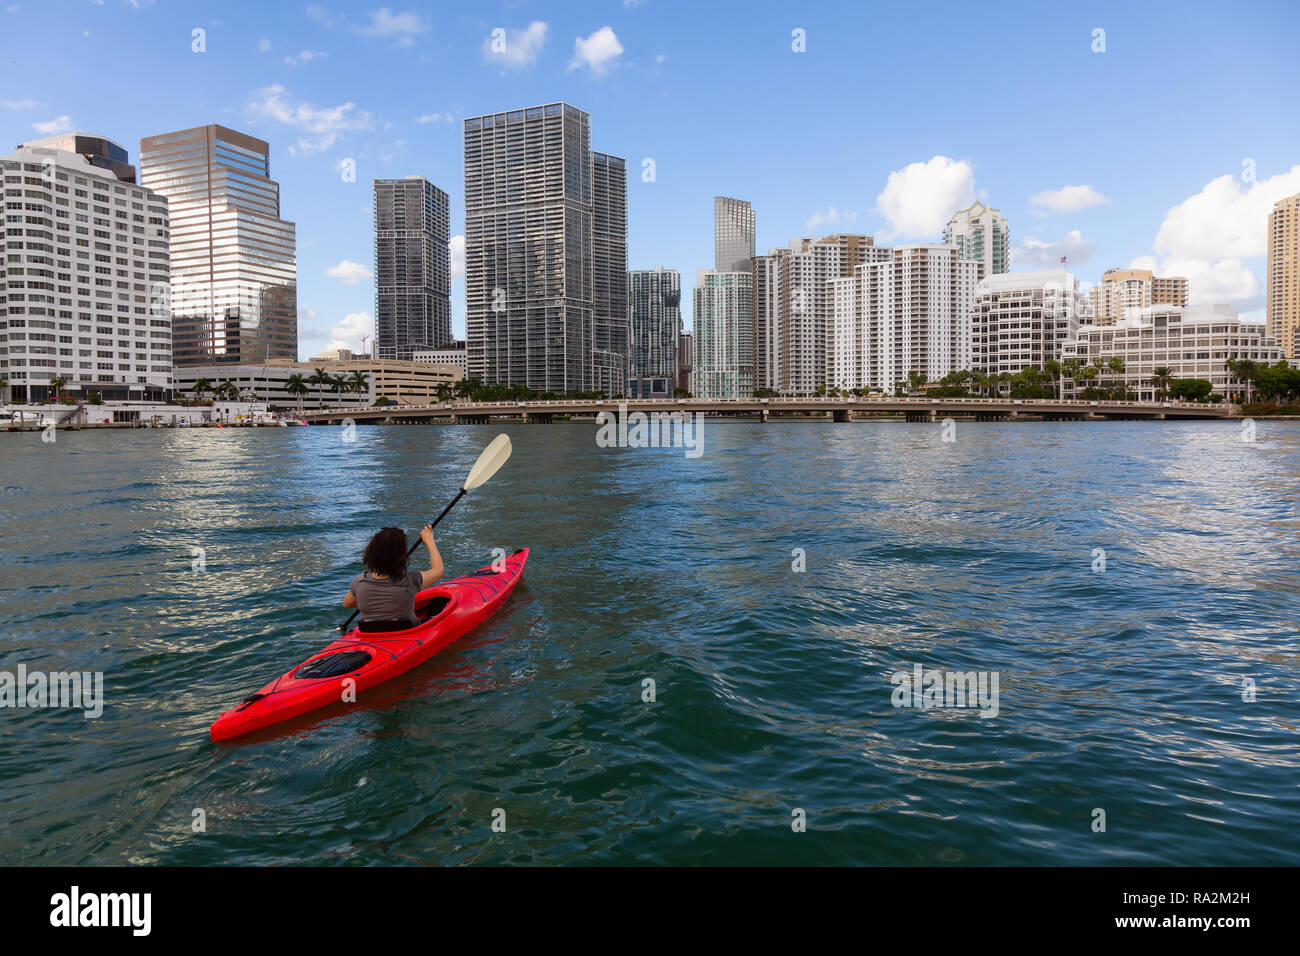 Adventurous girl kayaking in front of a modern Downtown Cityscape during a sunny evening. Taken in Miami, Florida, United States of America. Stock Photo